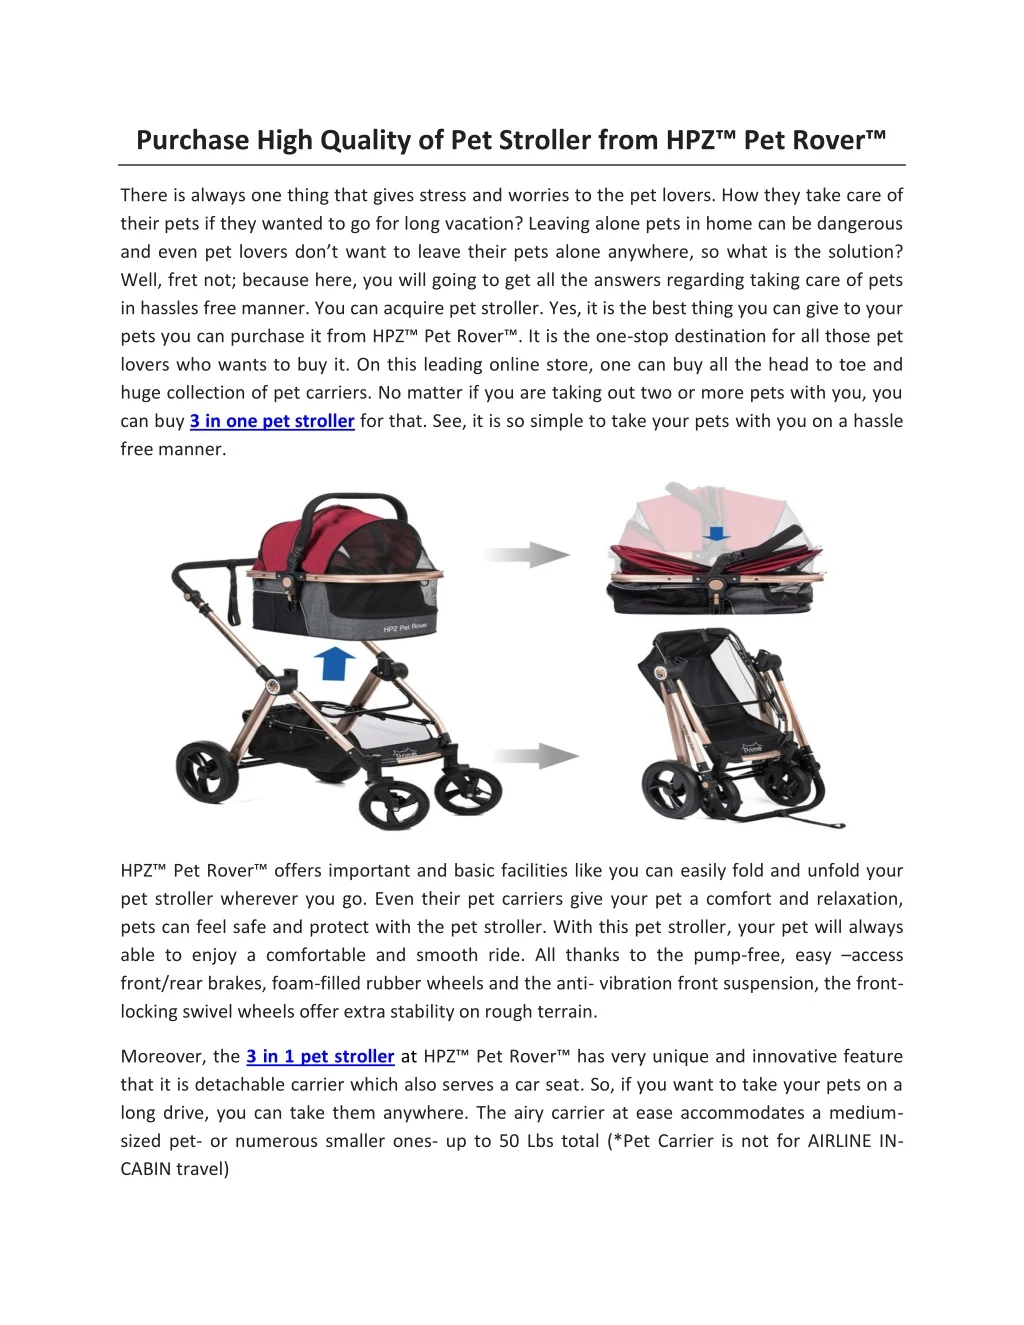 purchase high quality of pet stroller from